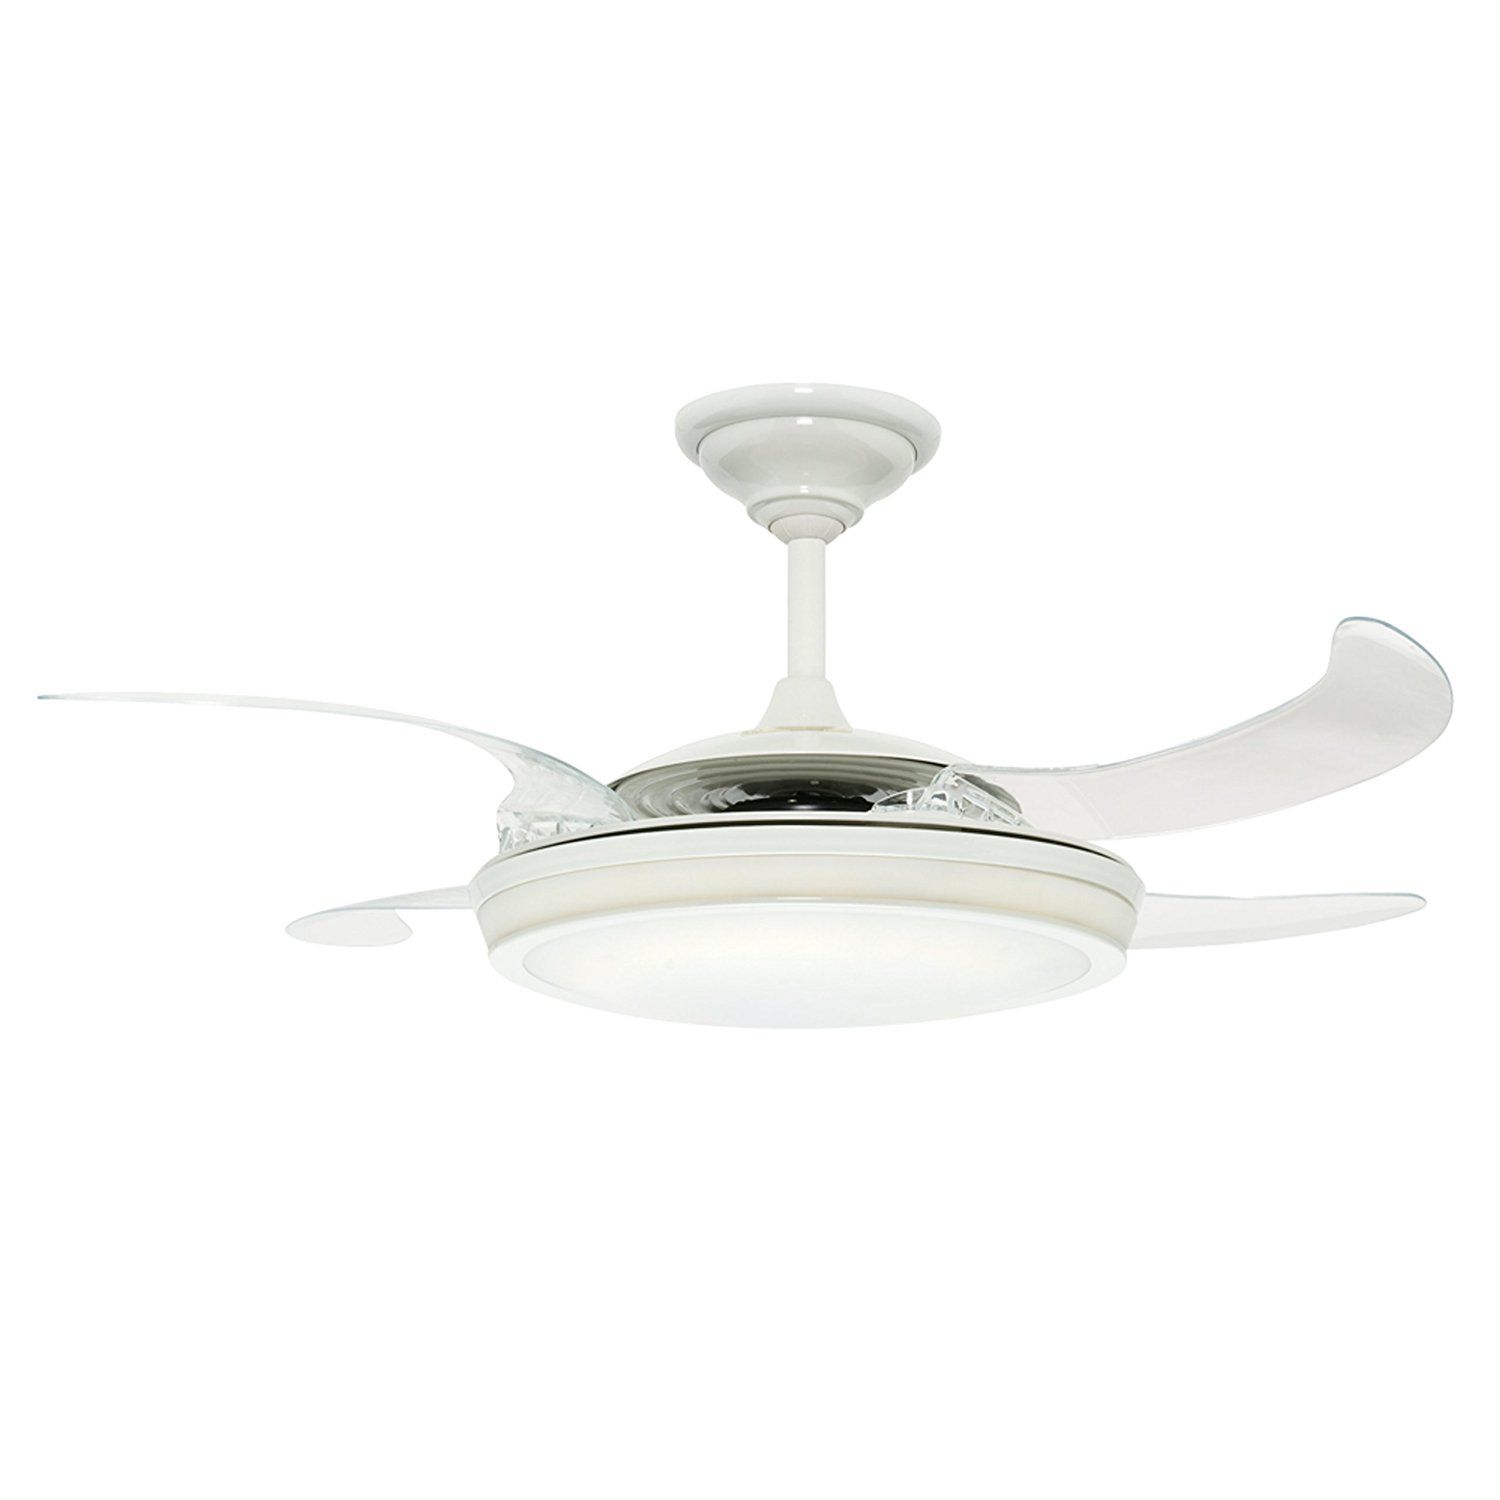 Hunter 21427 Fanaway 48-Inch Ceiling Fan, White with Clear Retractable Blades